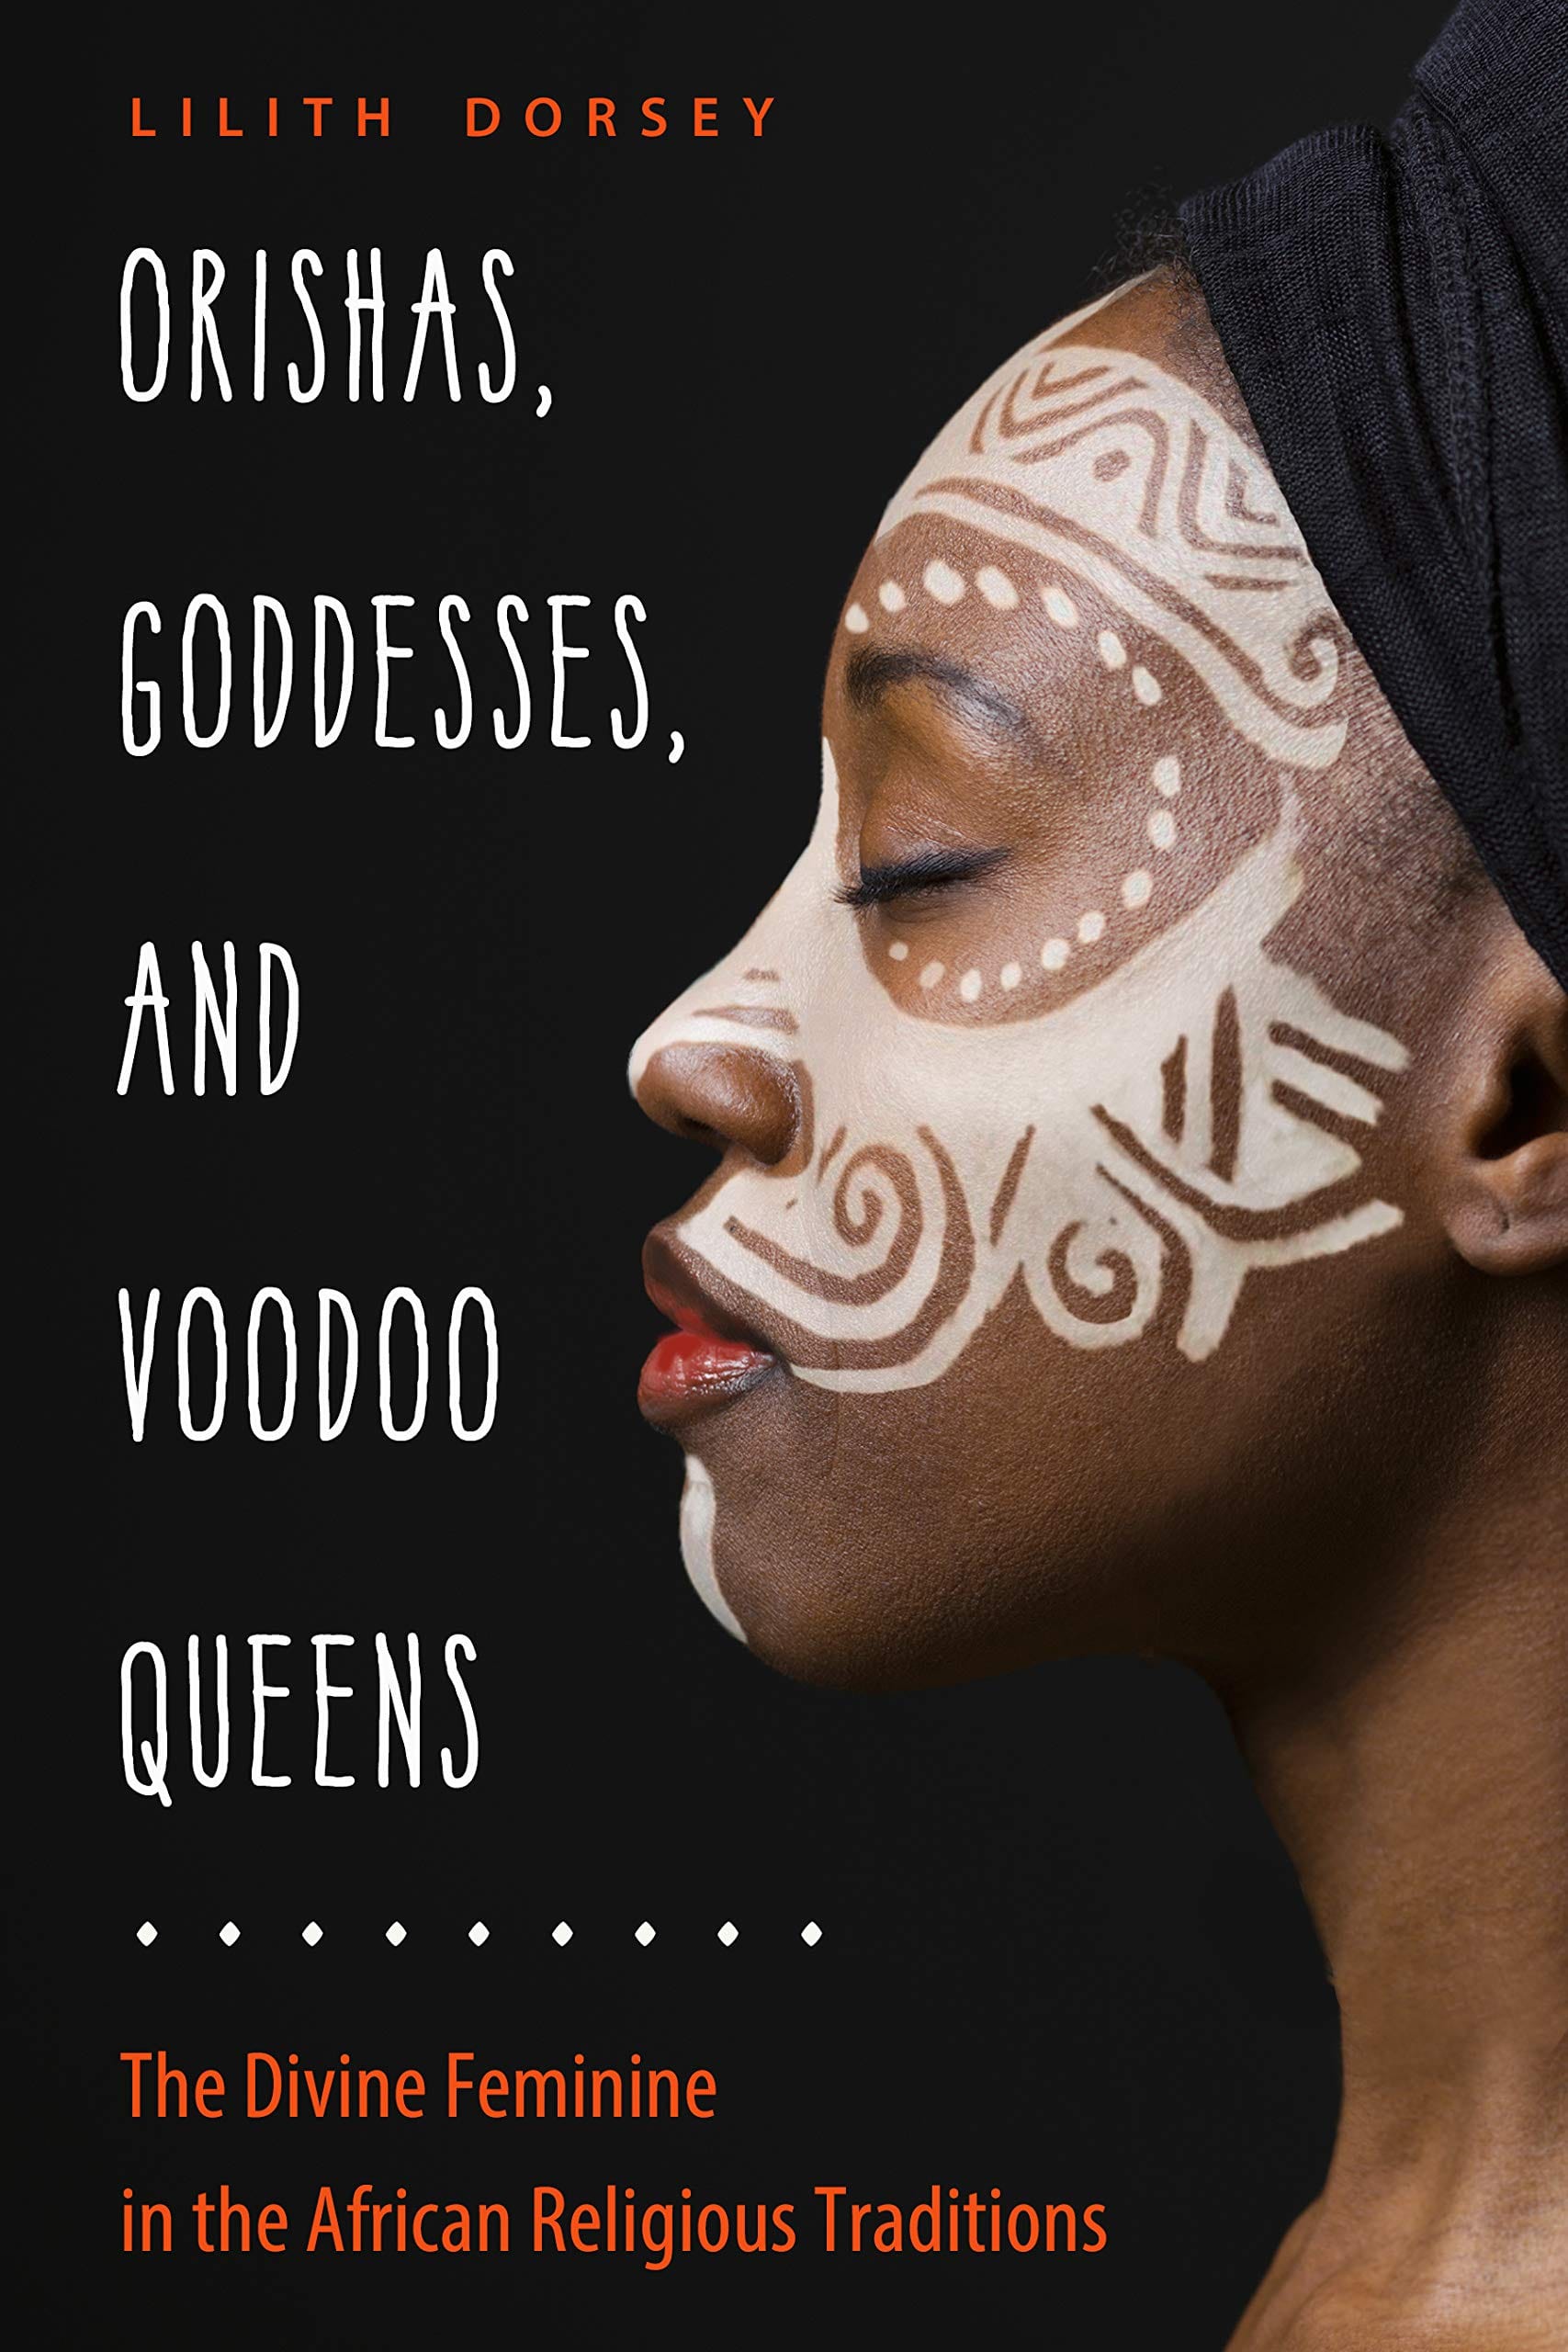 Orishas, Goddesses, and Voodoo Queens: Divine Feminine in the African Religious Traditions by Lilith Dorsey - Third Eye